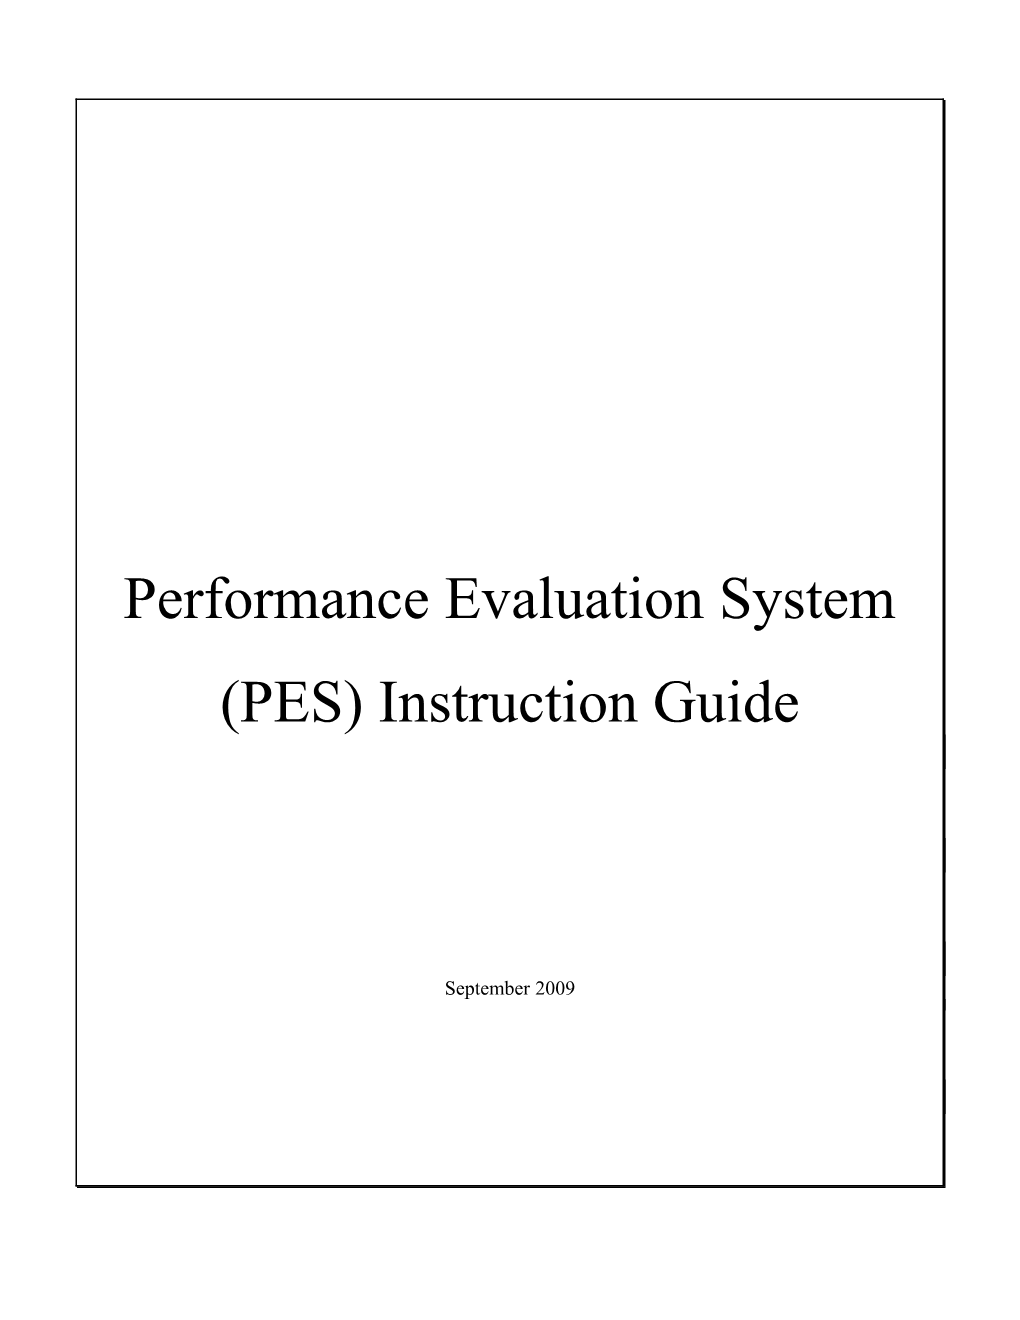 The State of New Jersey Performance Evaluation System (PES) Intruction Guide